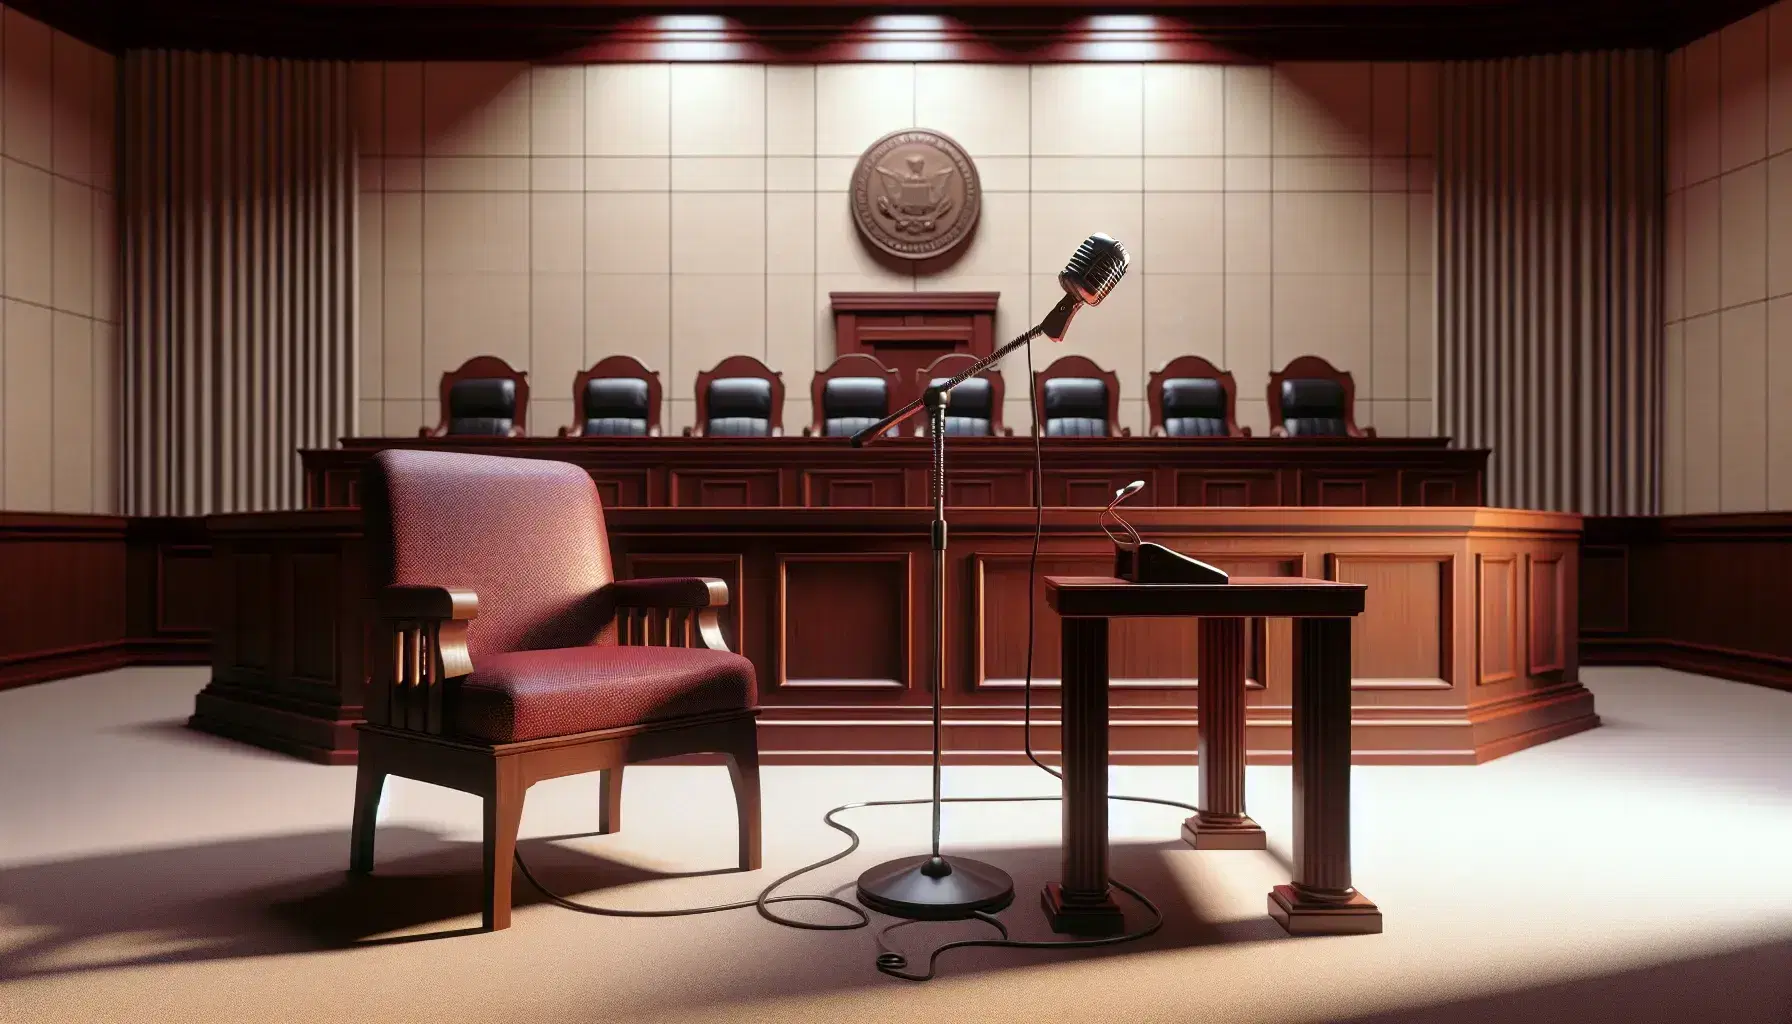 Courtroom with dark wooden witness stand and microphone, chair with red cushion and jury with empty chairs, judge's bench and blurred seal.